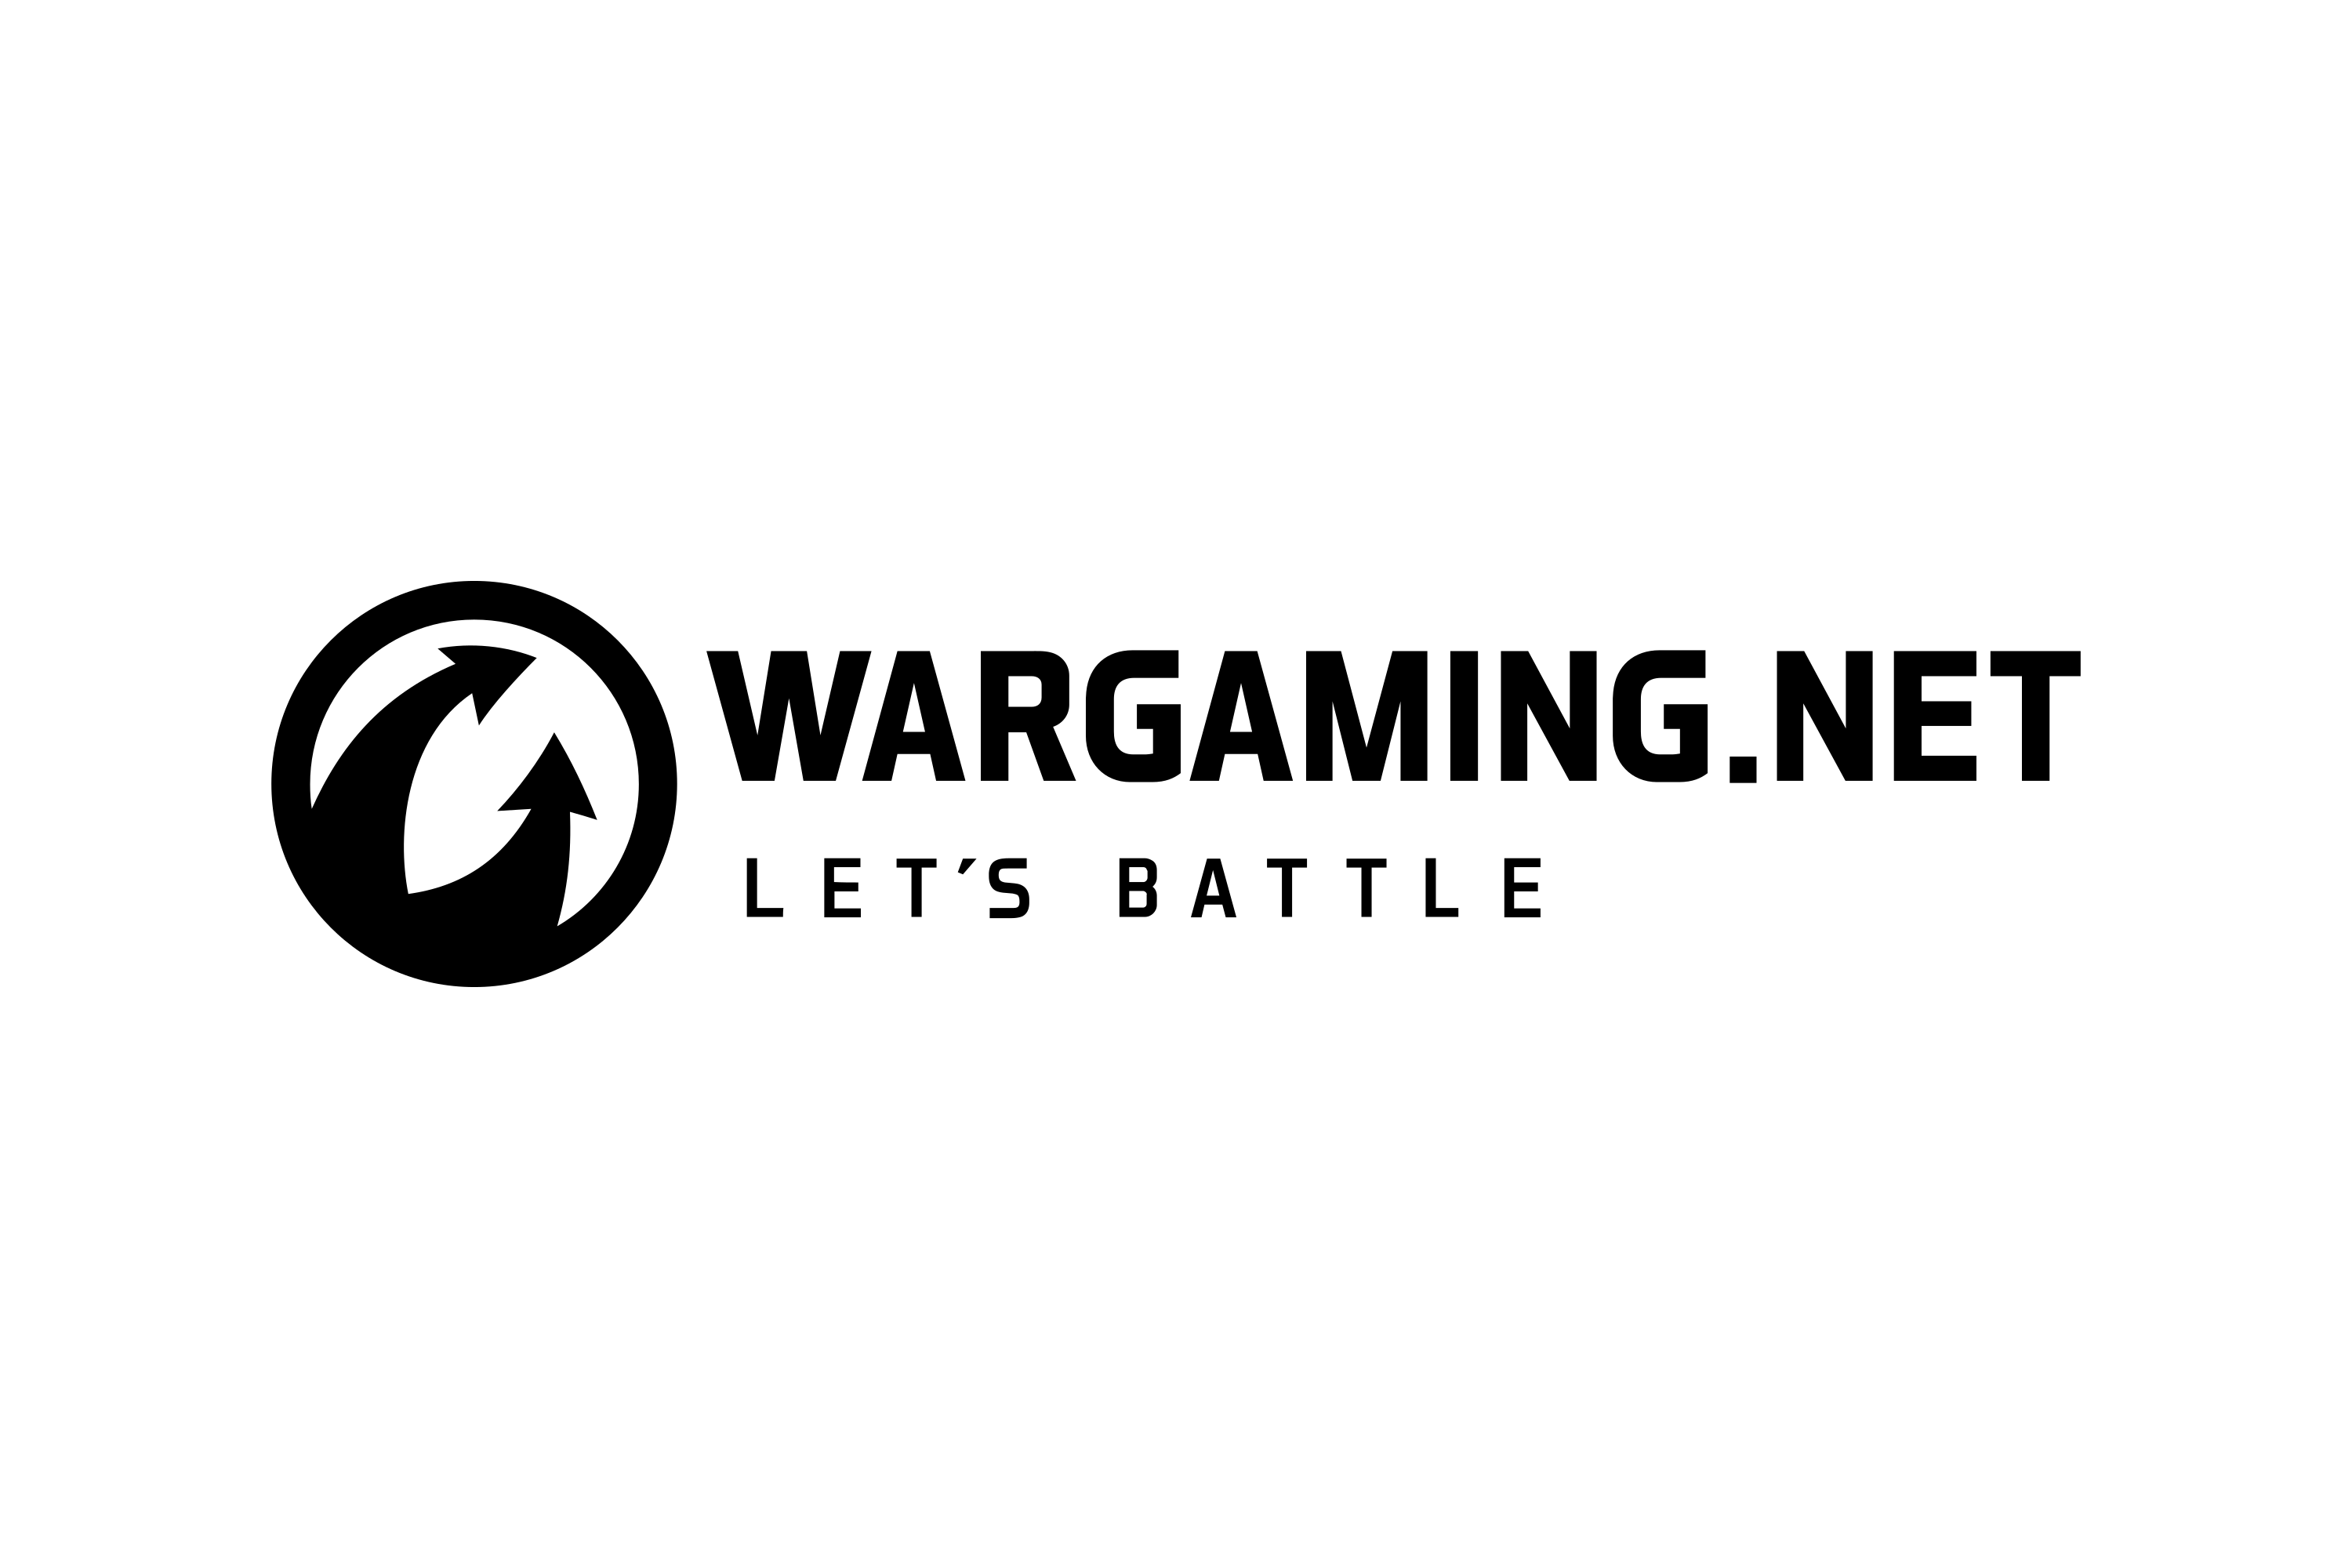 Wargaming, one of the largest gaming studios, is a partner for our Games Development curriculum